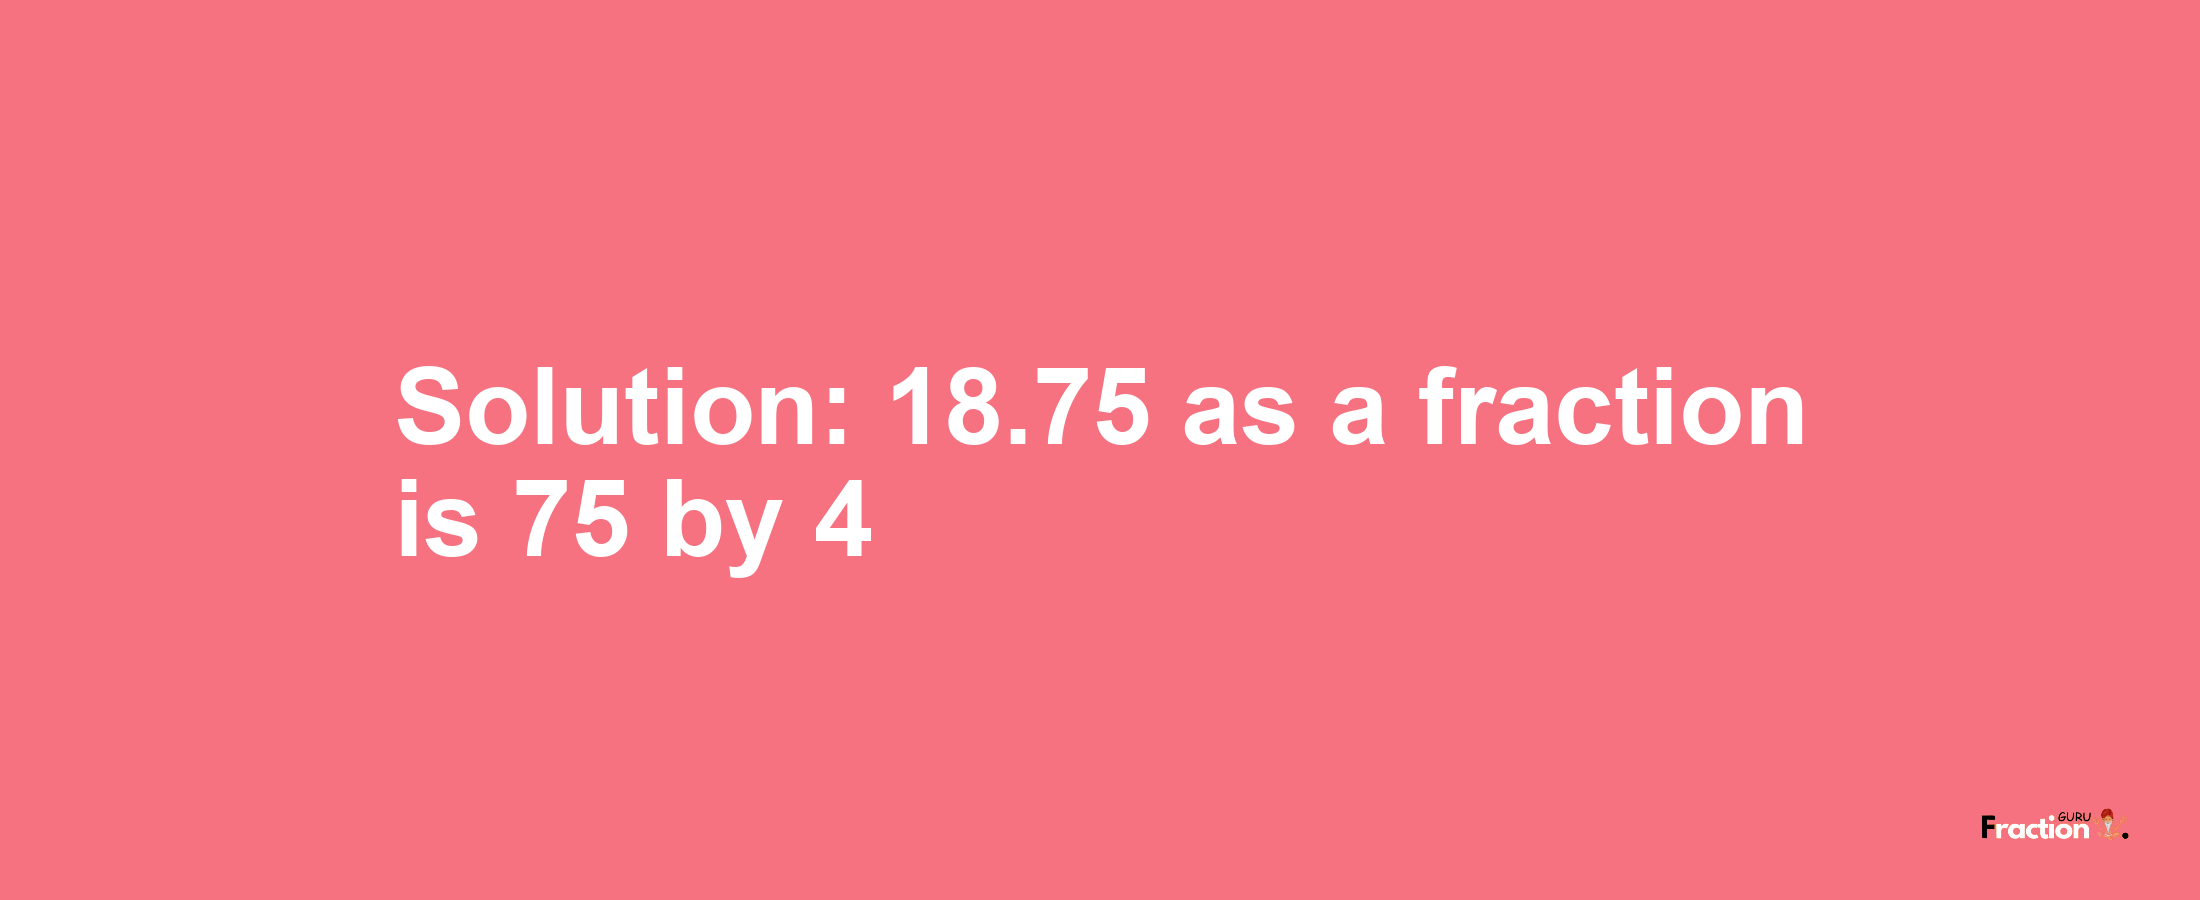 Solution:18.75 as a fraction is 75/4